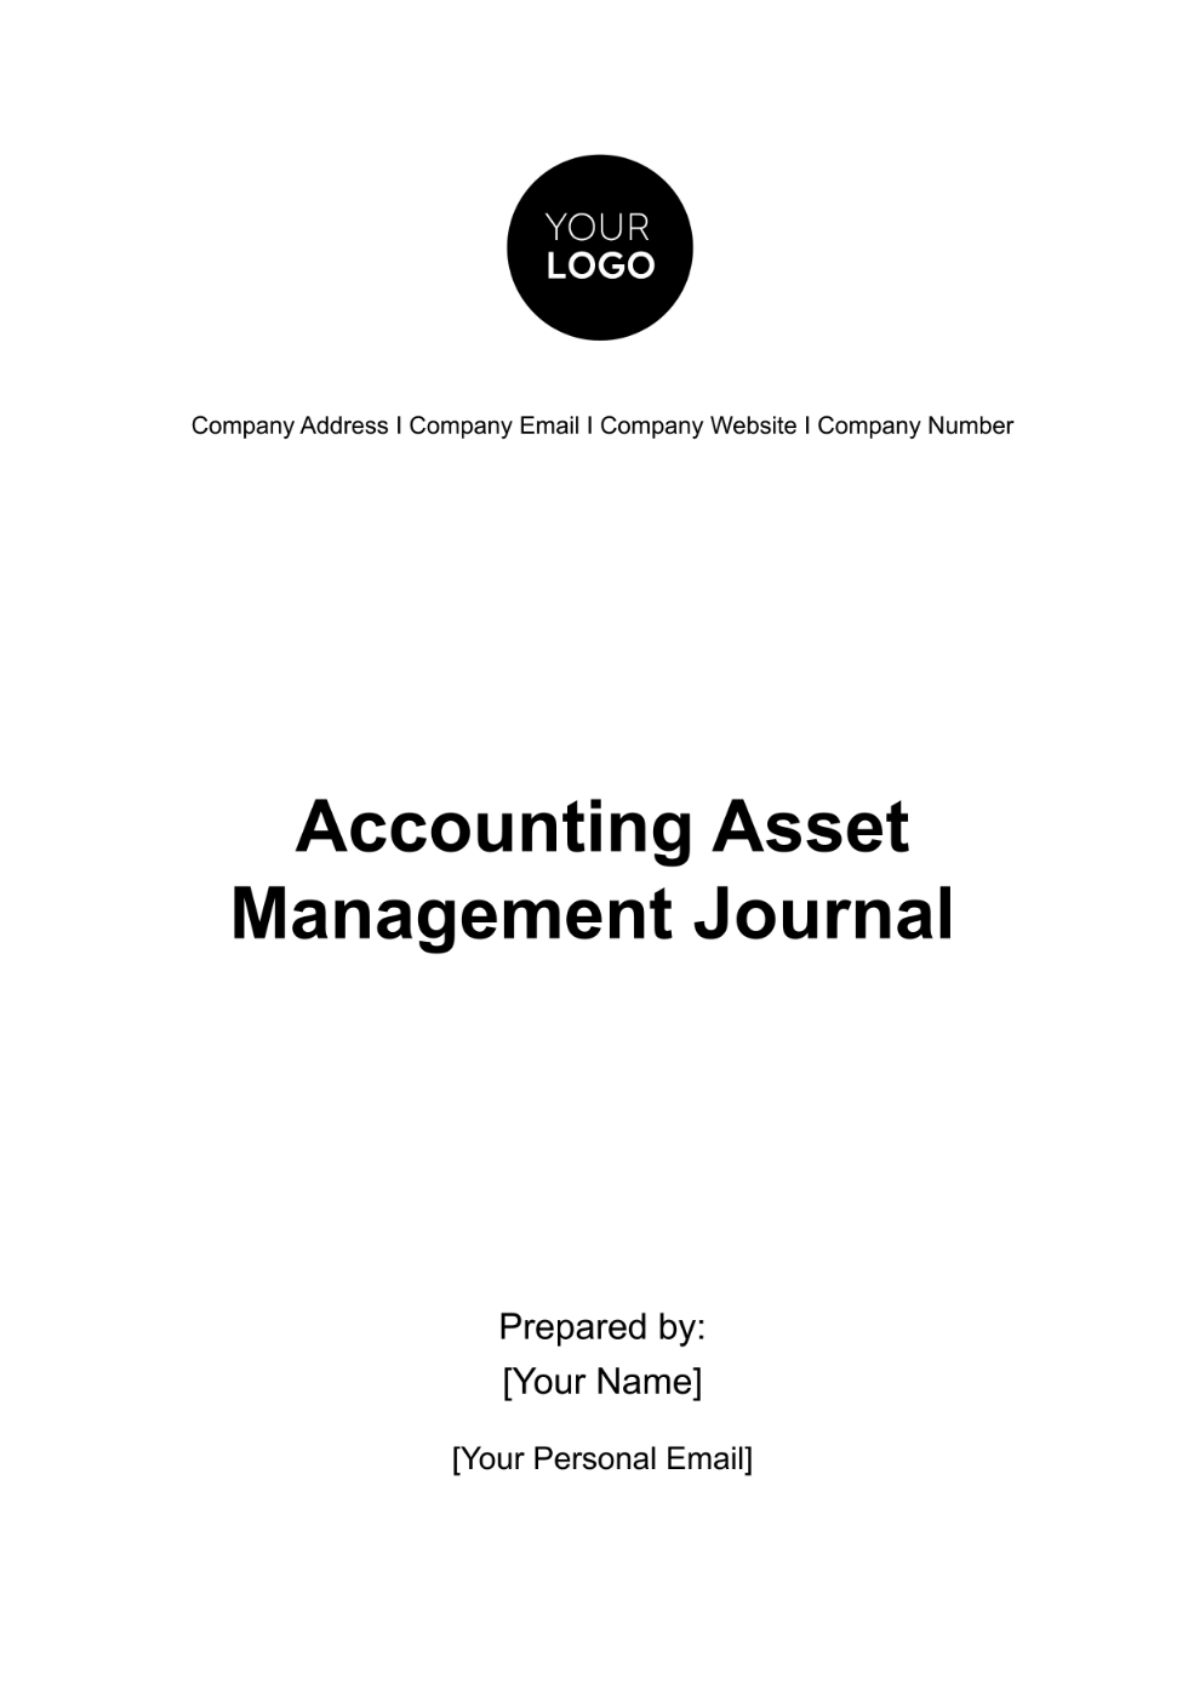 Free Accounting Asset Management Journal Template